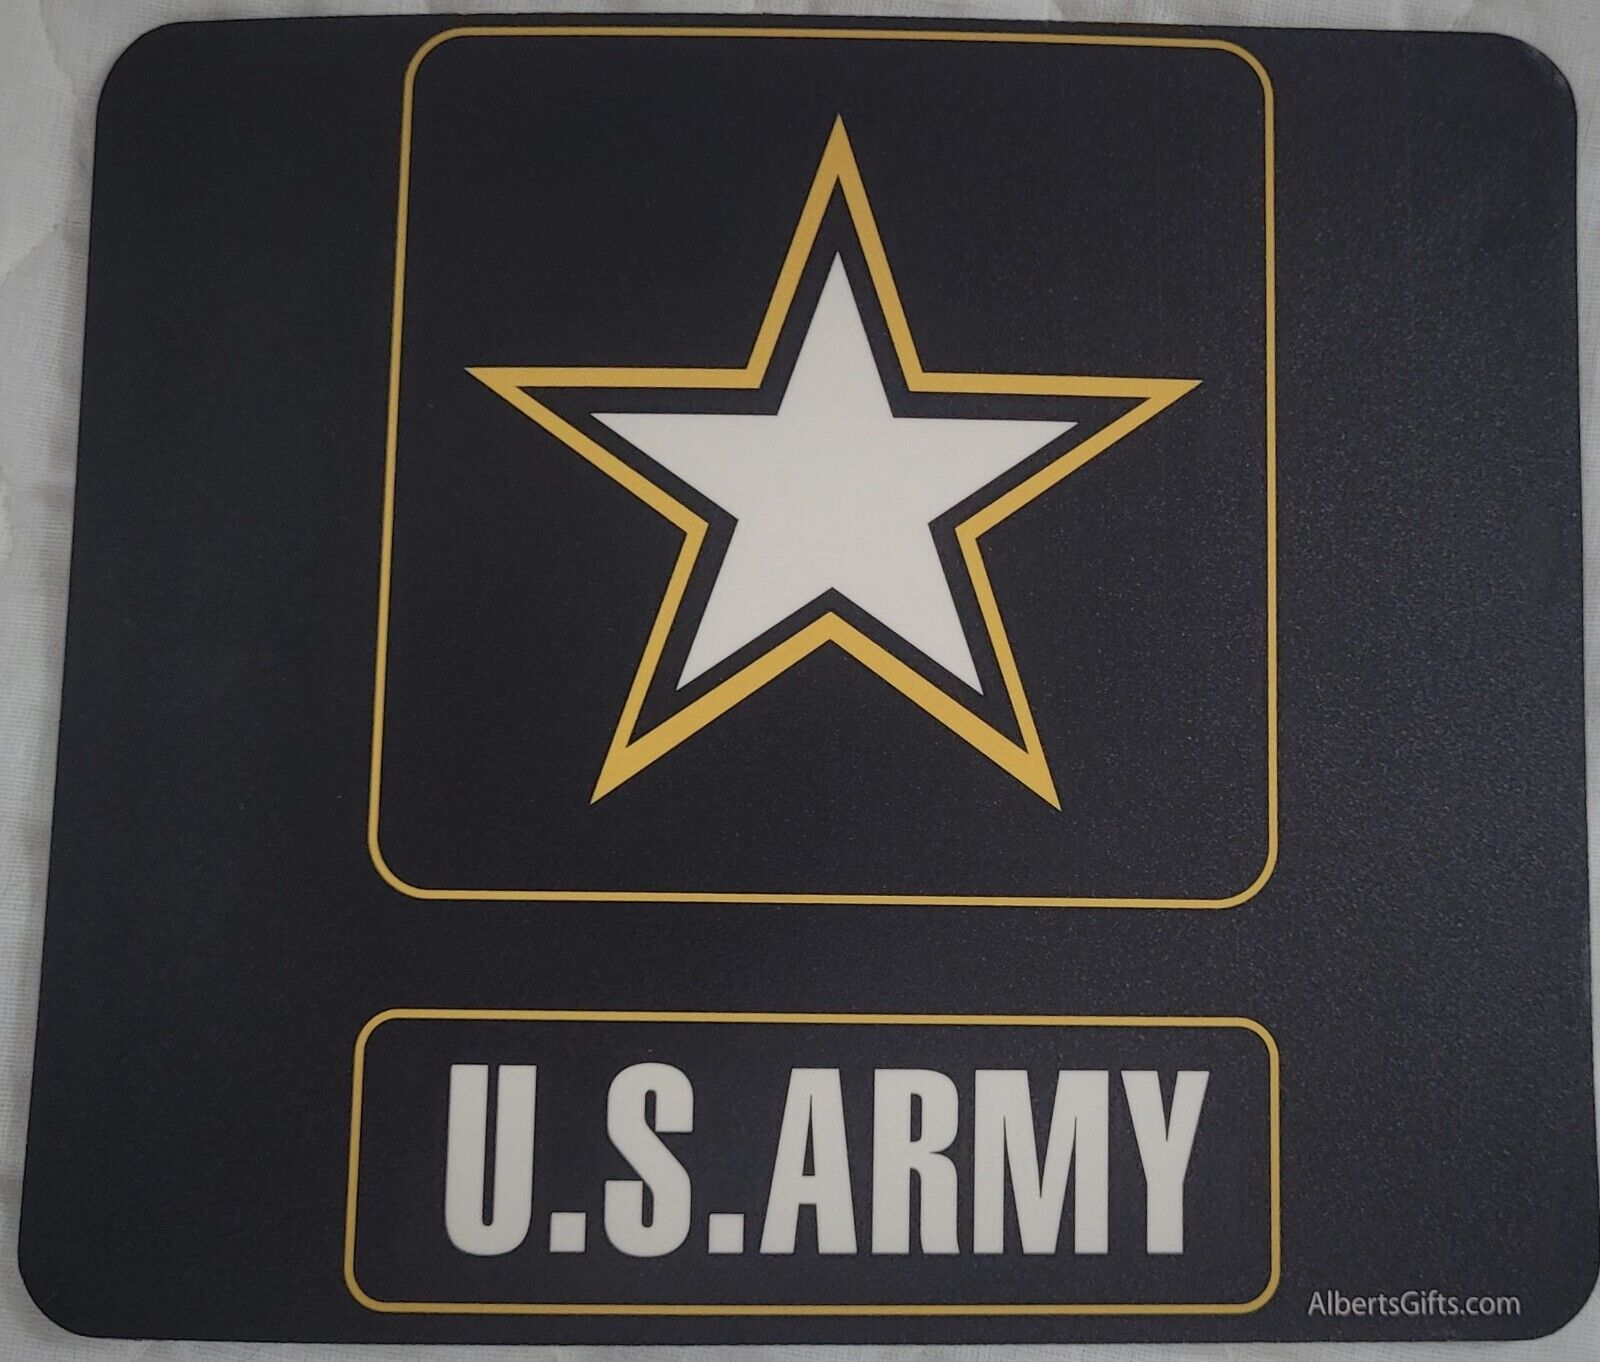 US ARMY STAR INSIGNIA COMPUTER MOUSE PAD MAT - BRAND NEW - 